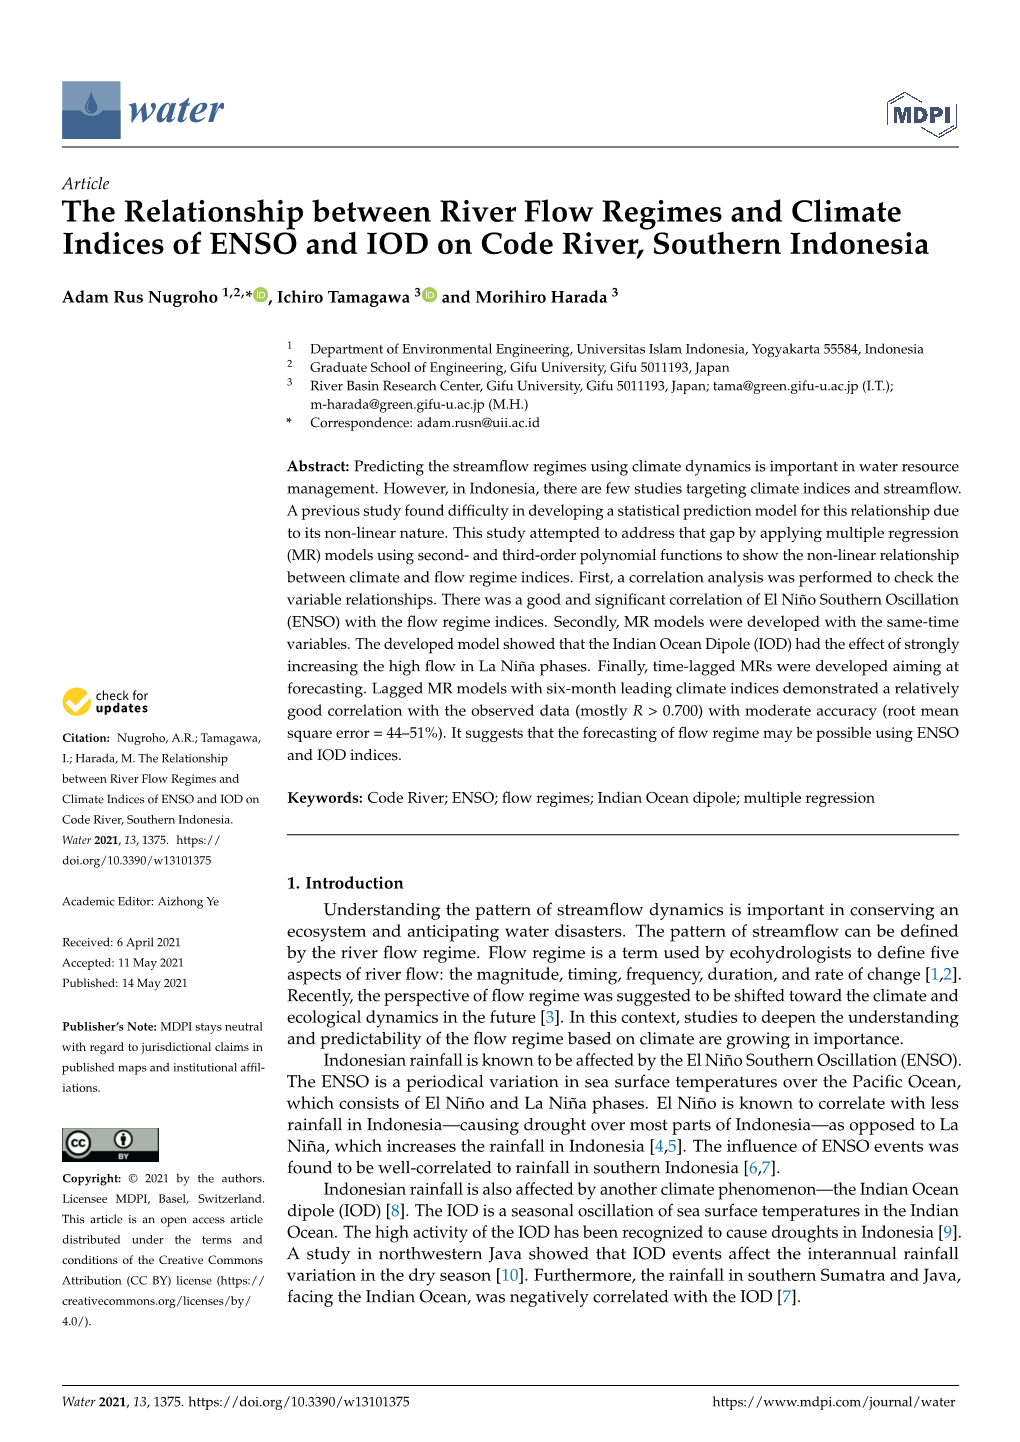 The Relationship Between River Flow Regimes and Climate Indices of ENSO and IOD on Code River, Southern Indonesia